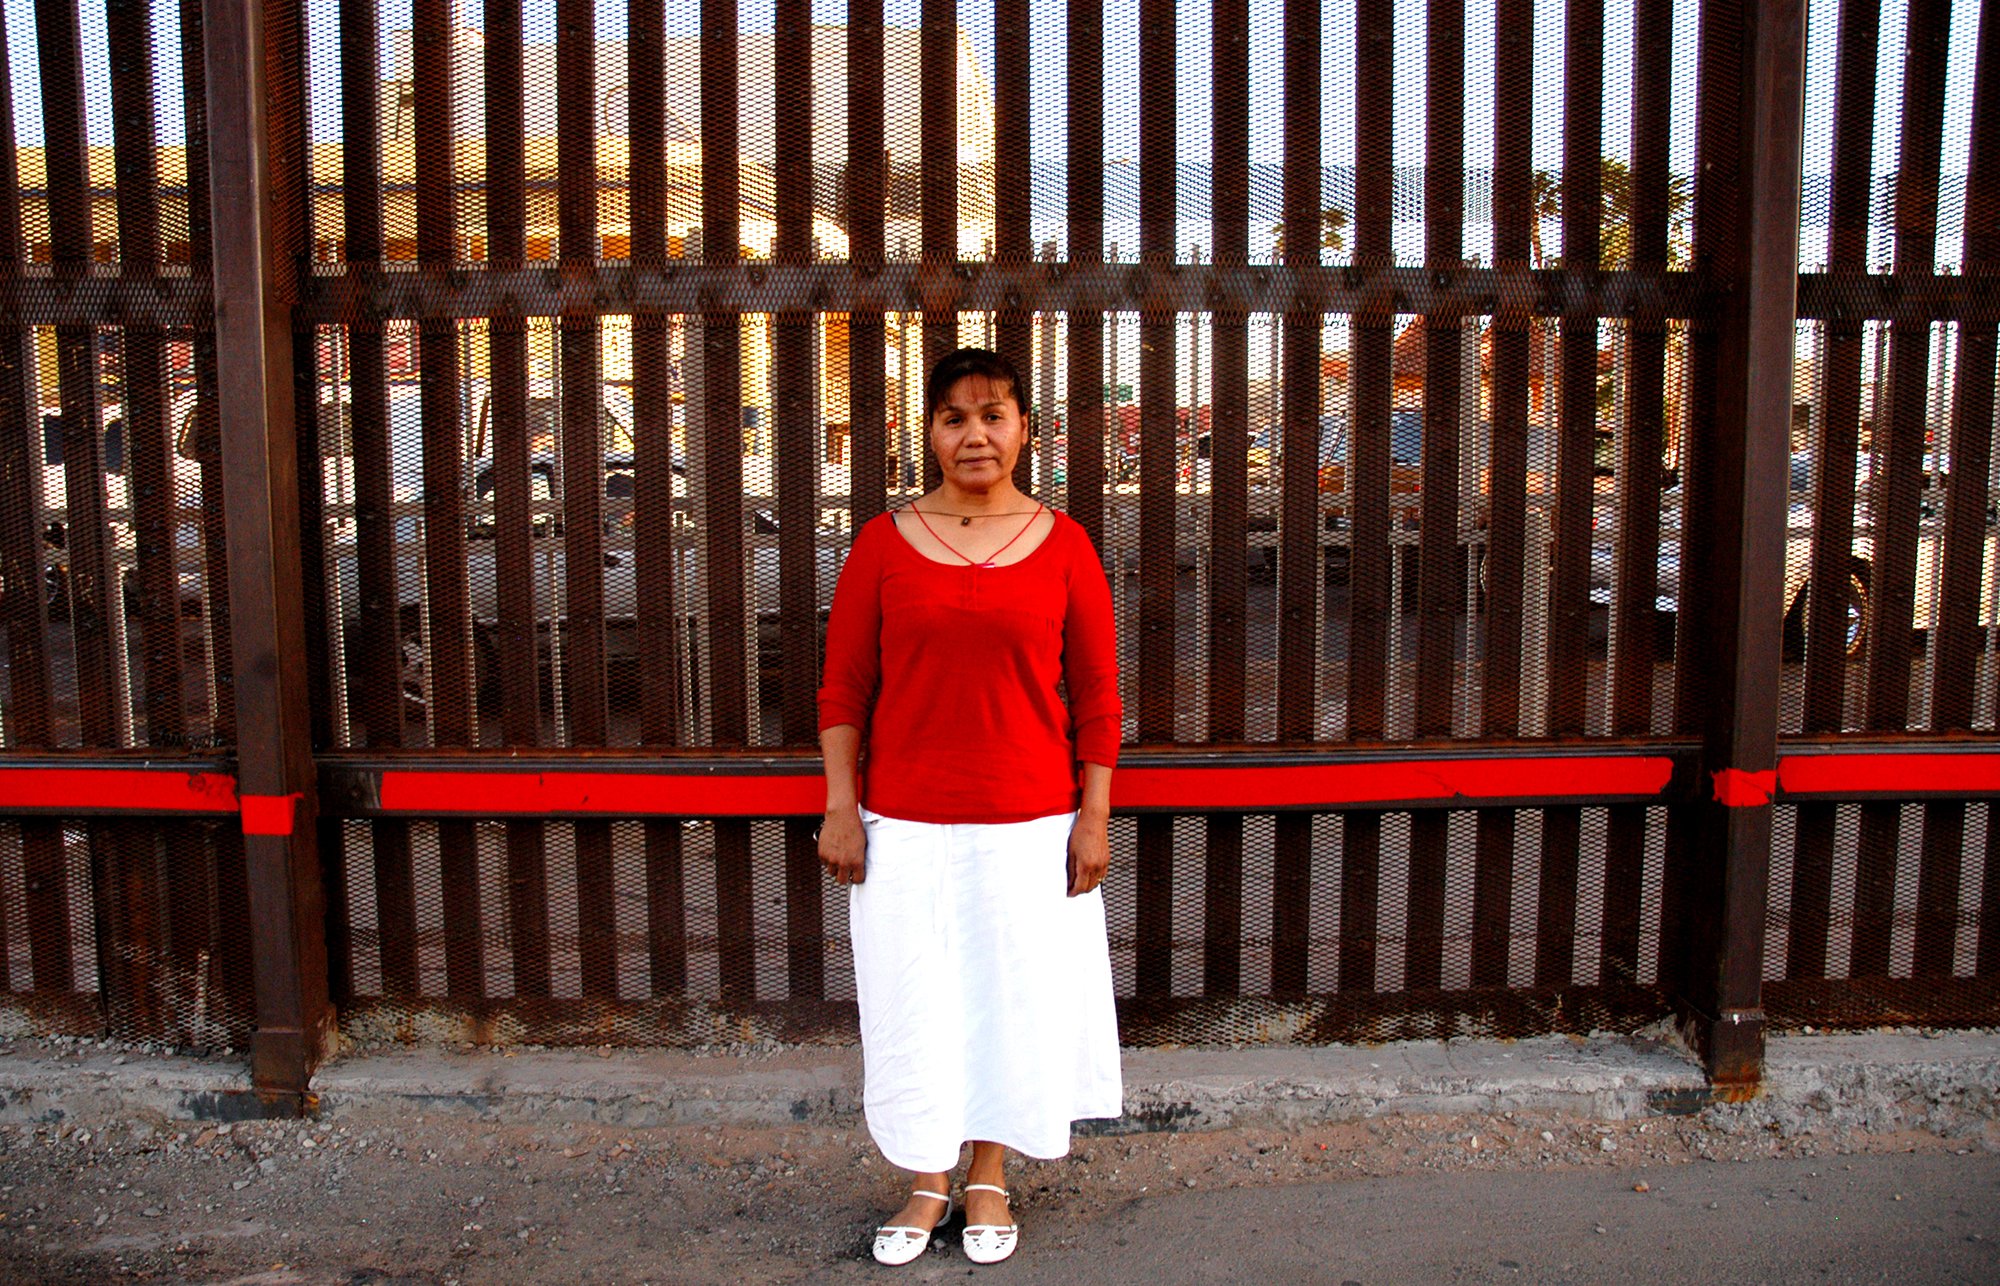   Alma Valencia, who lives in Calexico, California, but grew up in Mexicali, Mexico, and crosses the border several times a week for church and work. She says “I like life in Mexico, it’s freer, more about community. You go out in the evenings and yo